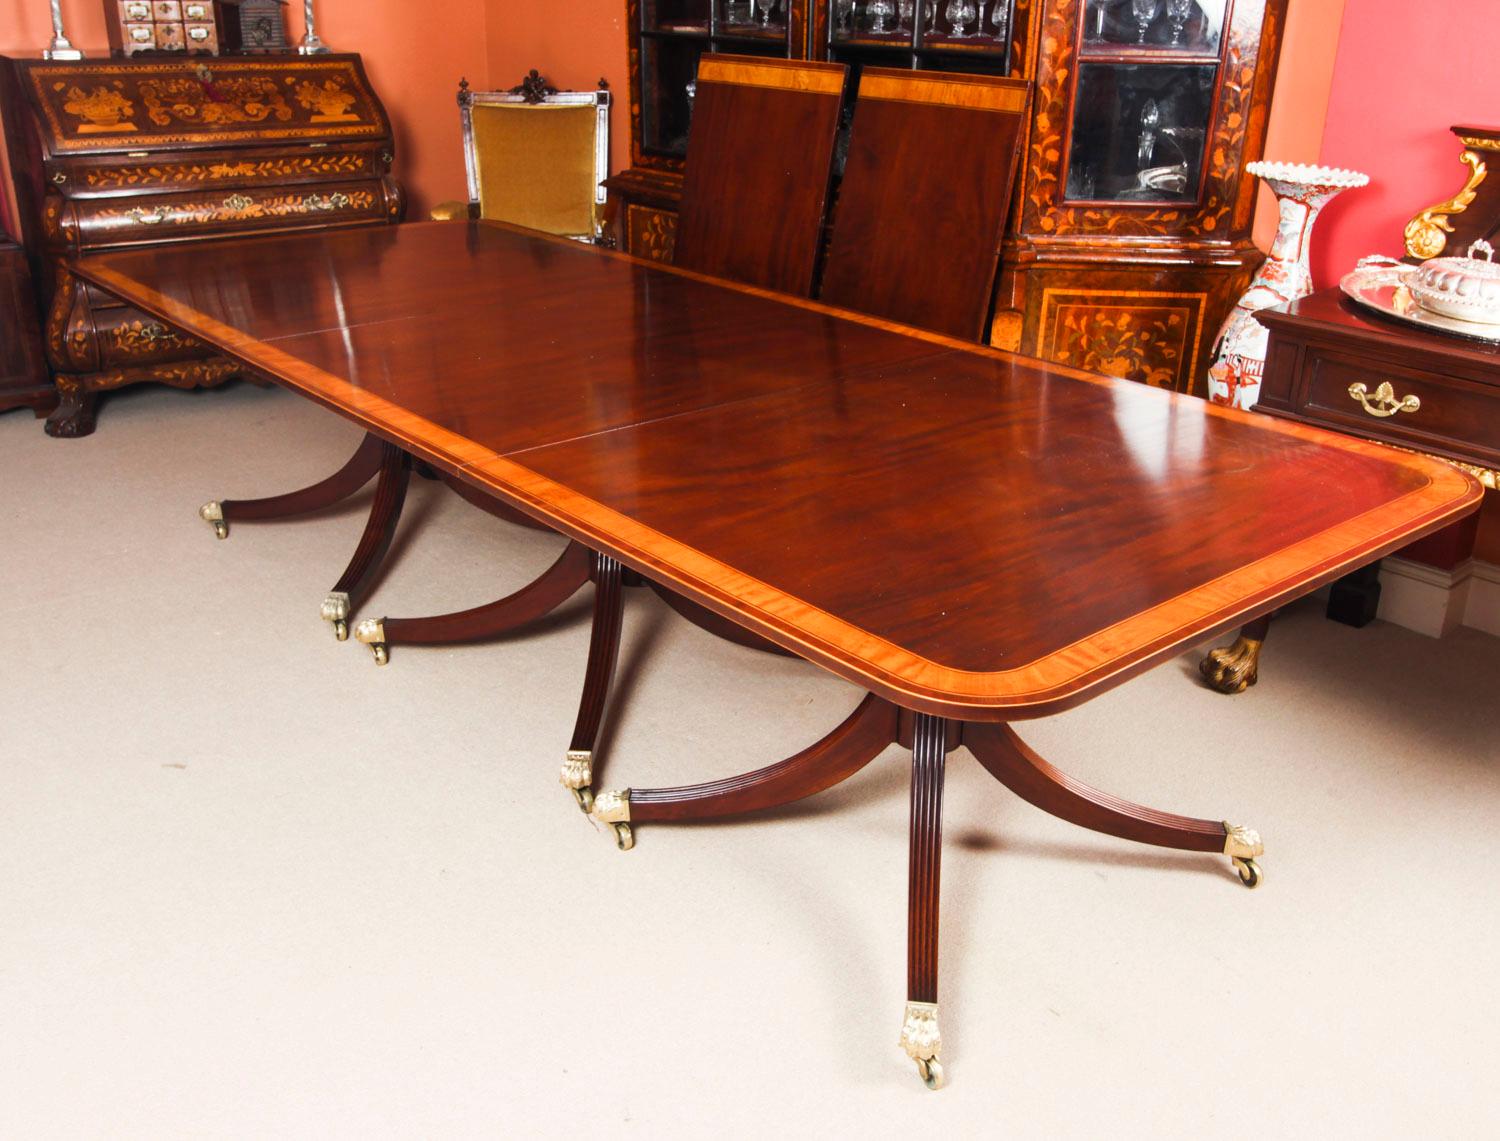 Regency Revival Antique Regency Metamorphic Dining Table 19th Century and 14 Chairs